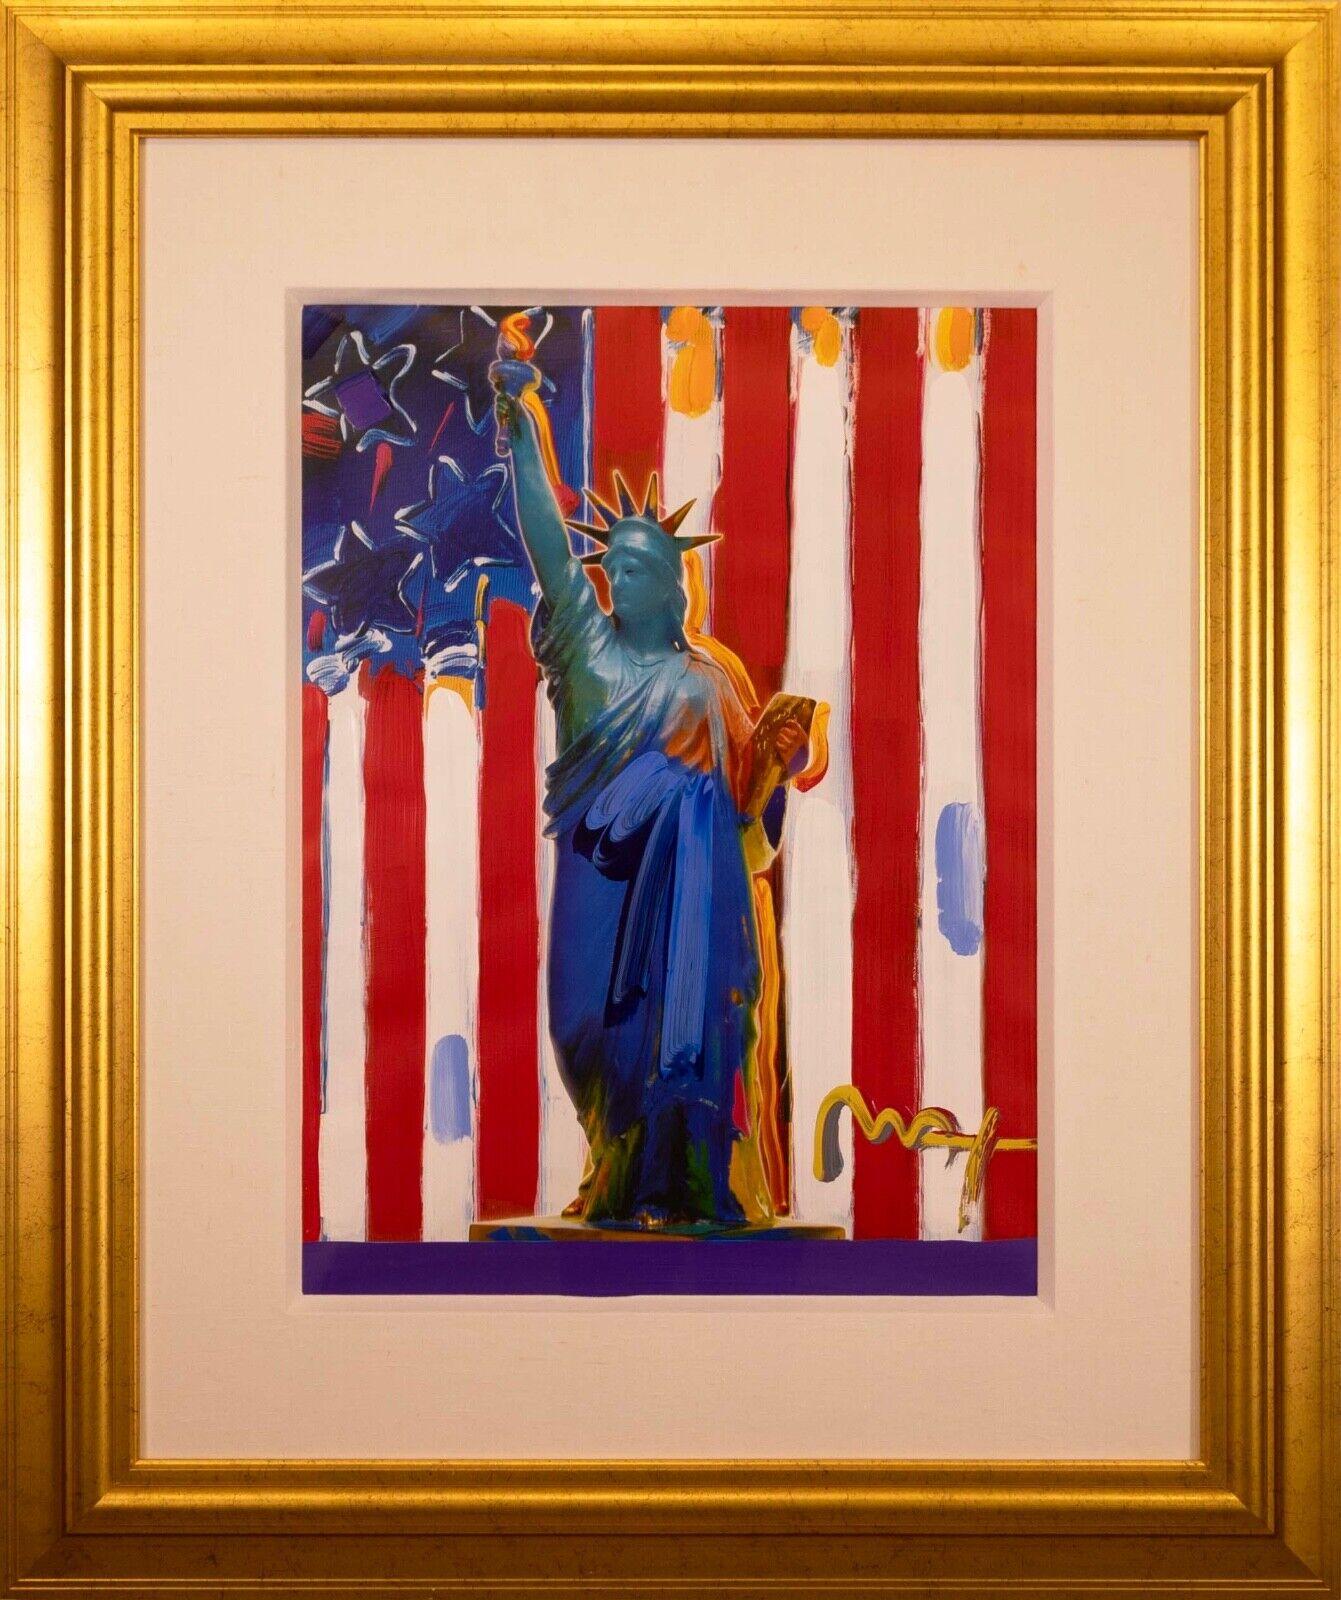 A powerful patriotic mixed-media lithography with acrylic painting on paper titled “United We Stand” by famed artist Peter Max. Hand signed in acrylic by artist top right. Created in 2001. This work varies from its counterparts. Though it still